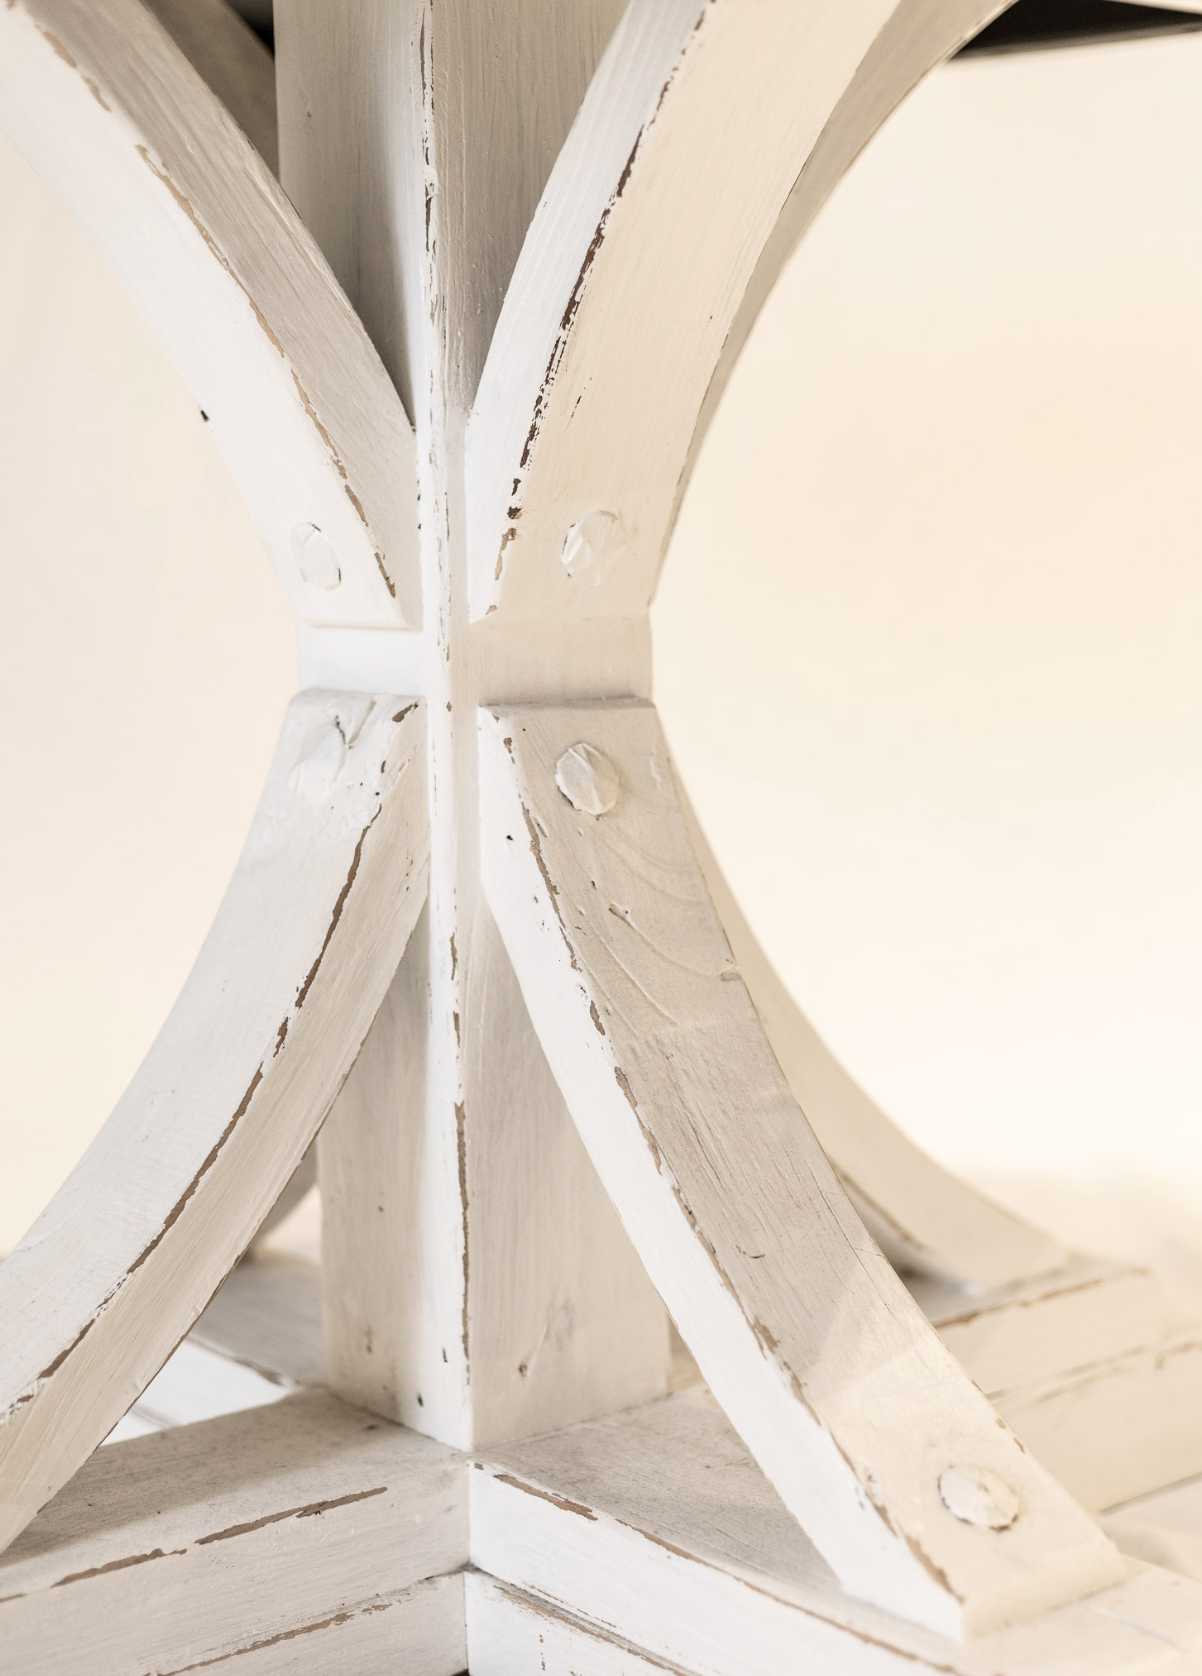 Brussels Round Dining Table White Legs